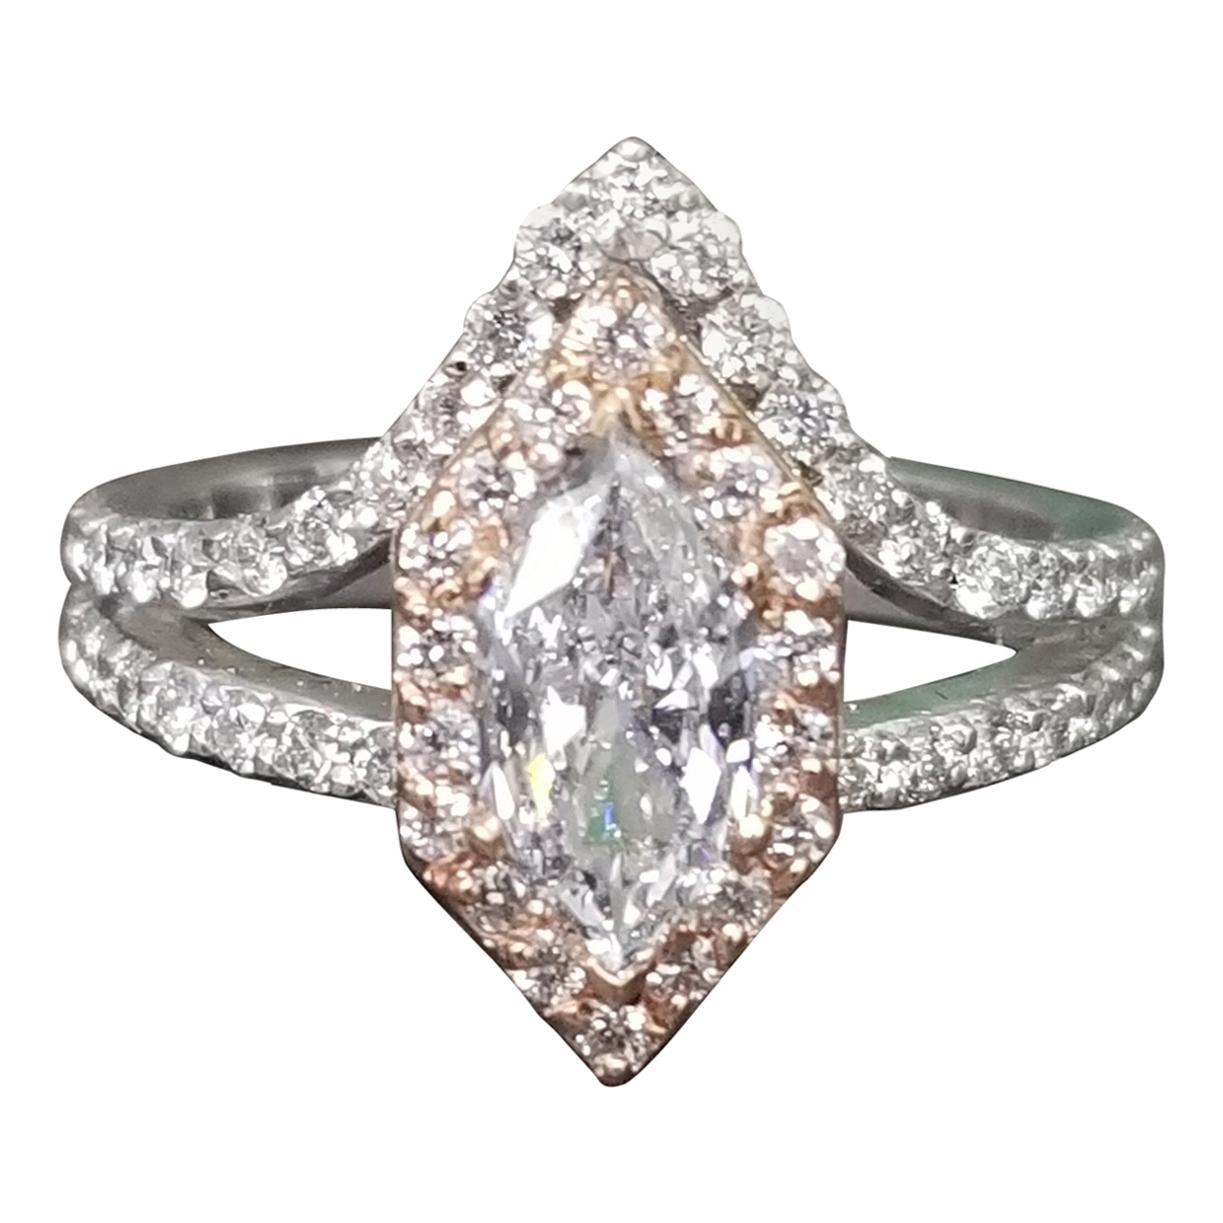 .84pt. 6 Sided Fancy Marquise Cut Diamond in Halo